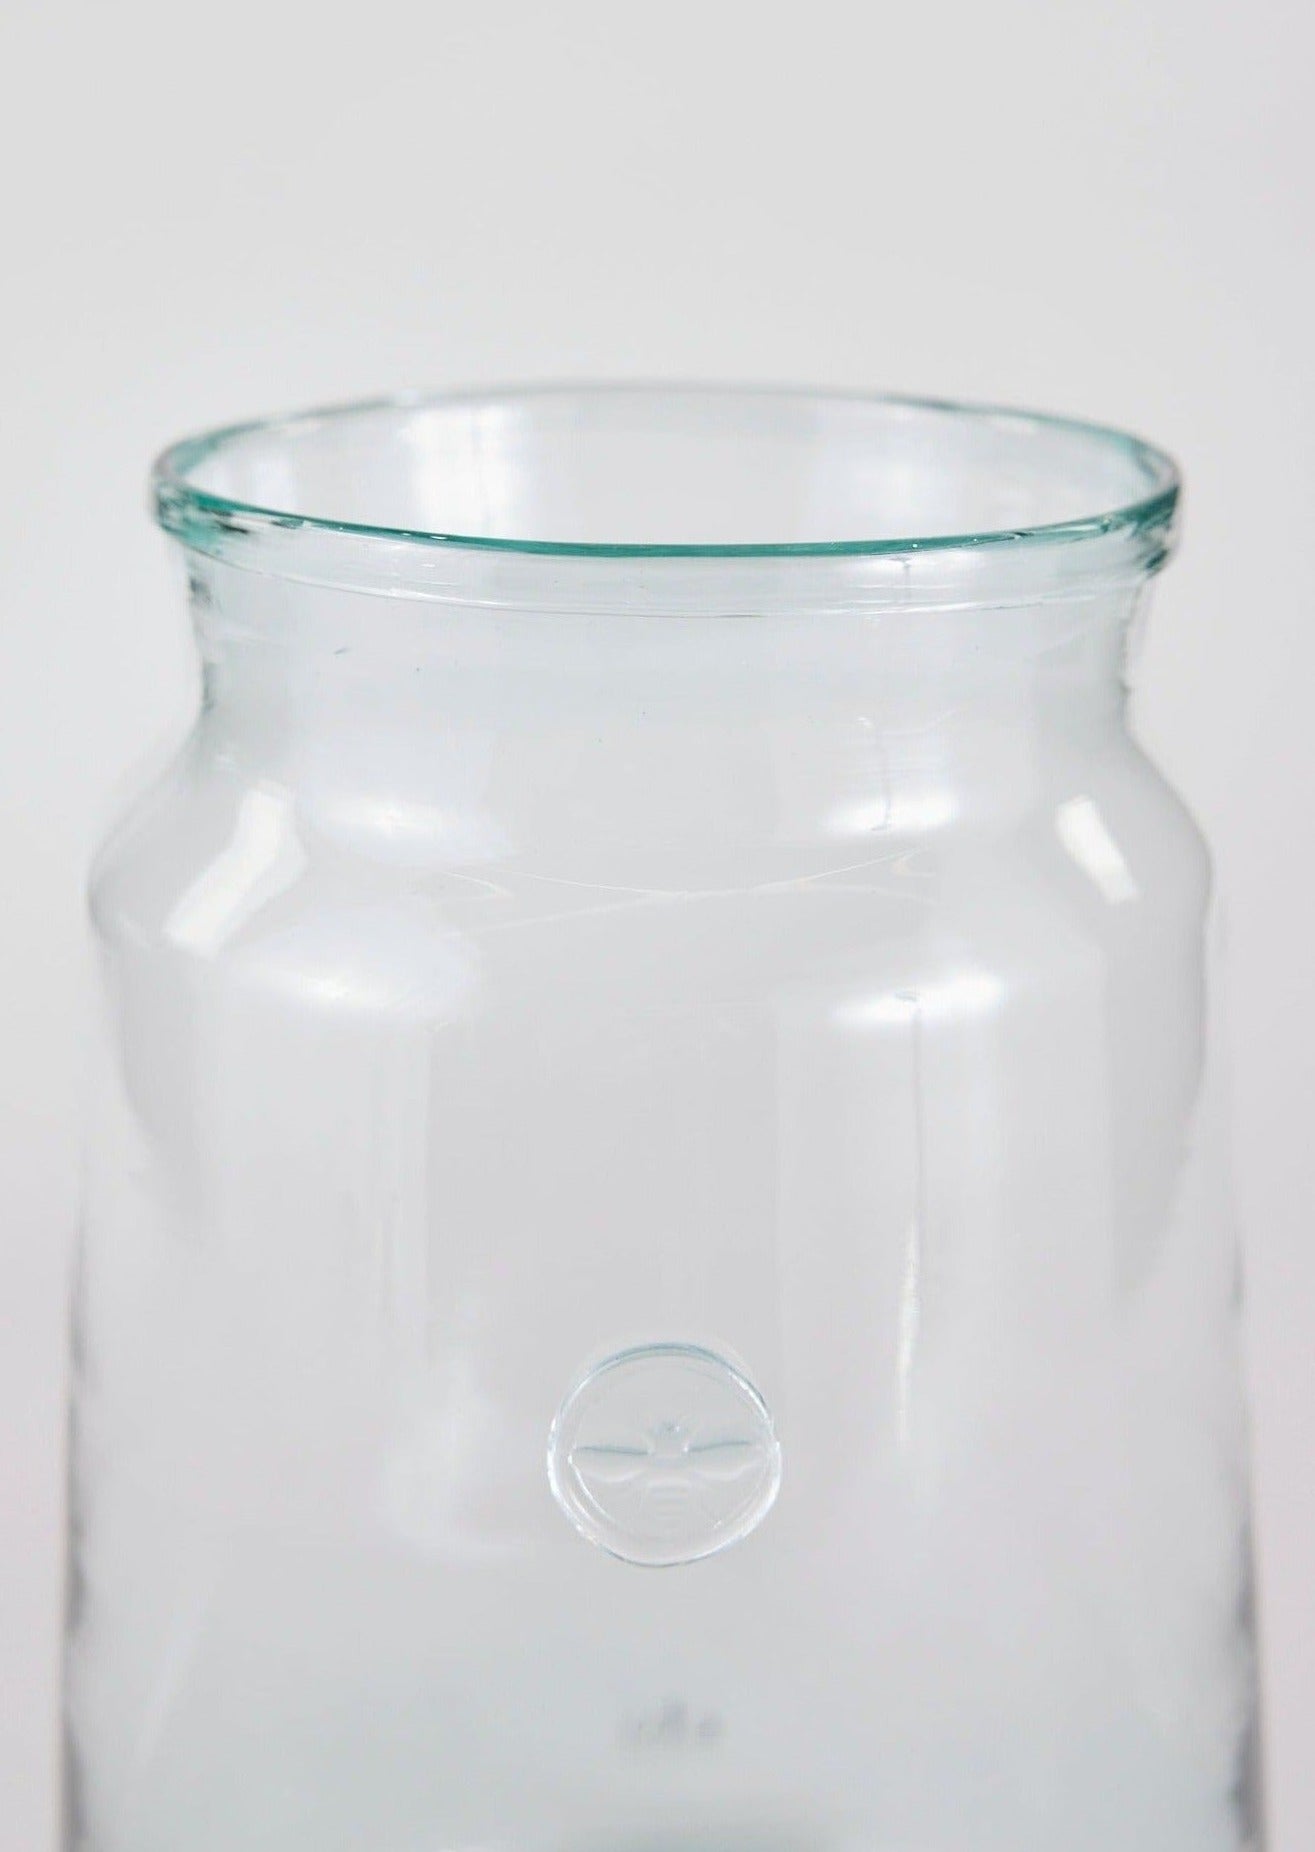 Large French Glass Jar Vase in Closeup View at afloral